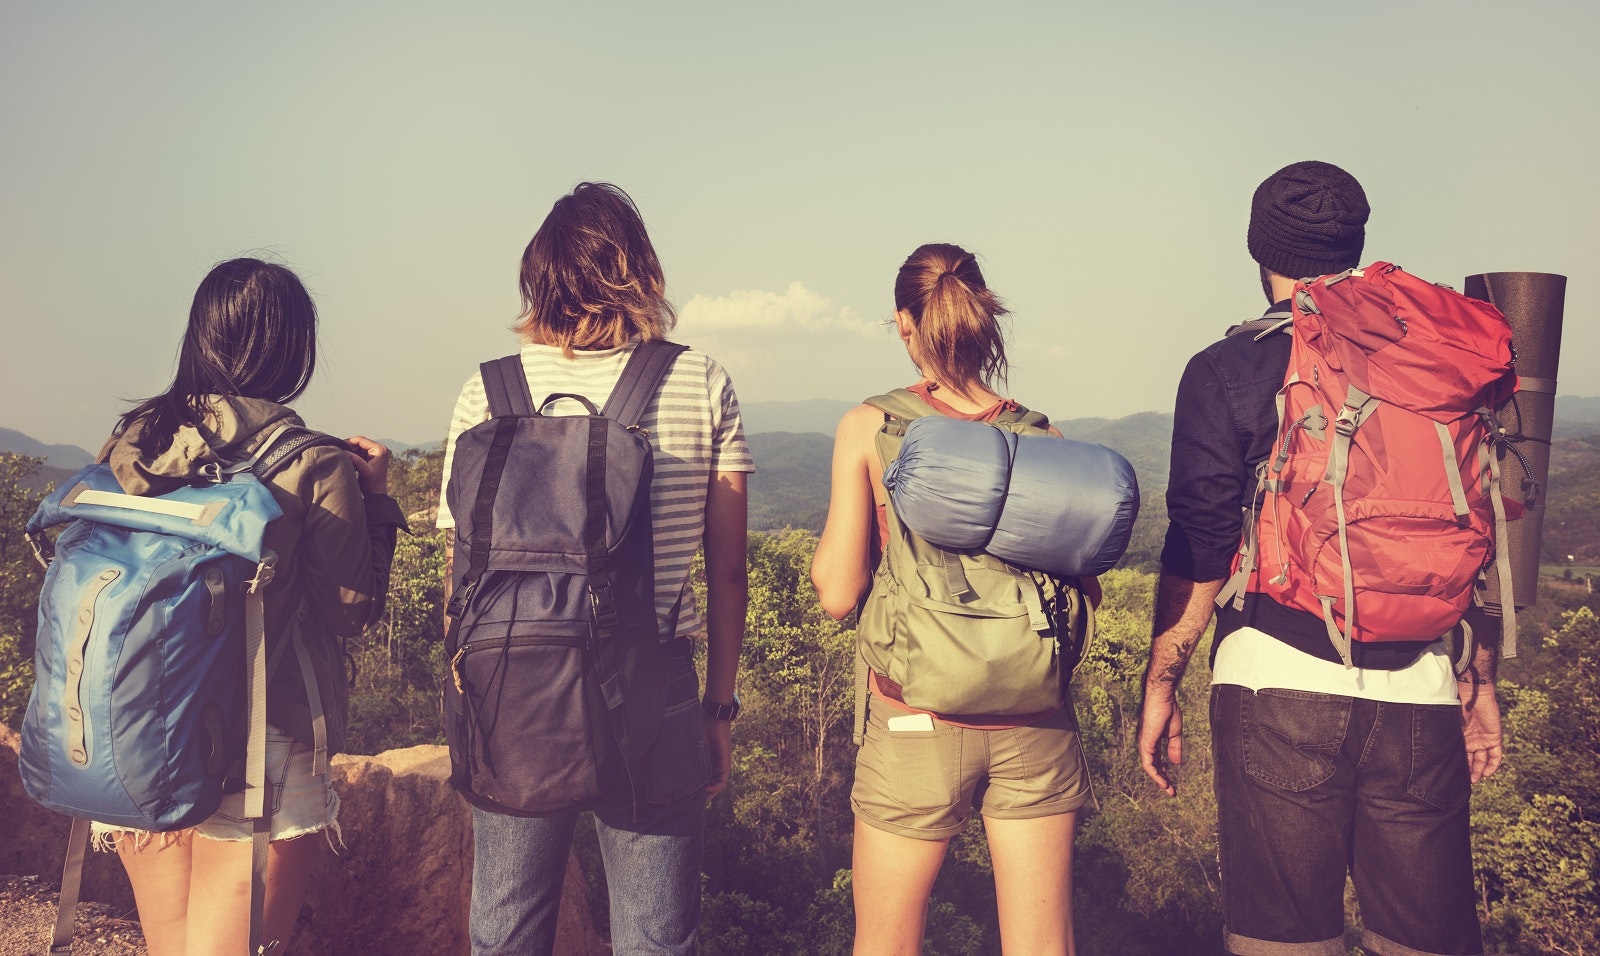 A shot of a group of four backpackers taken from behind. They all carry backpacks and have sleeping bags and various other items as they look out over a rural landscape; travel and grief 